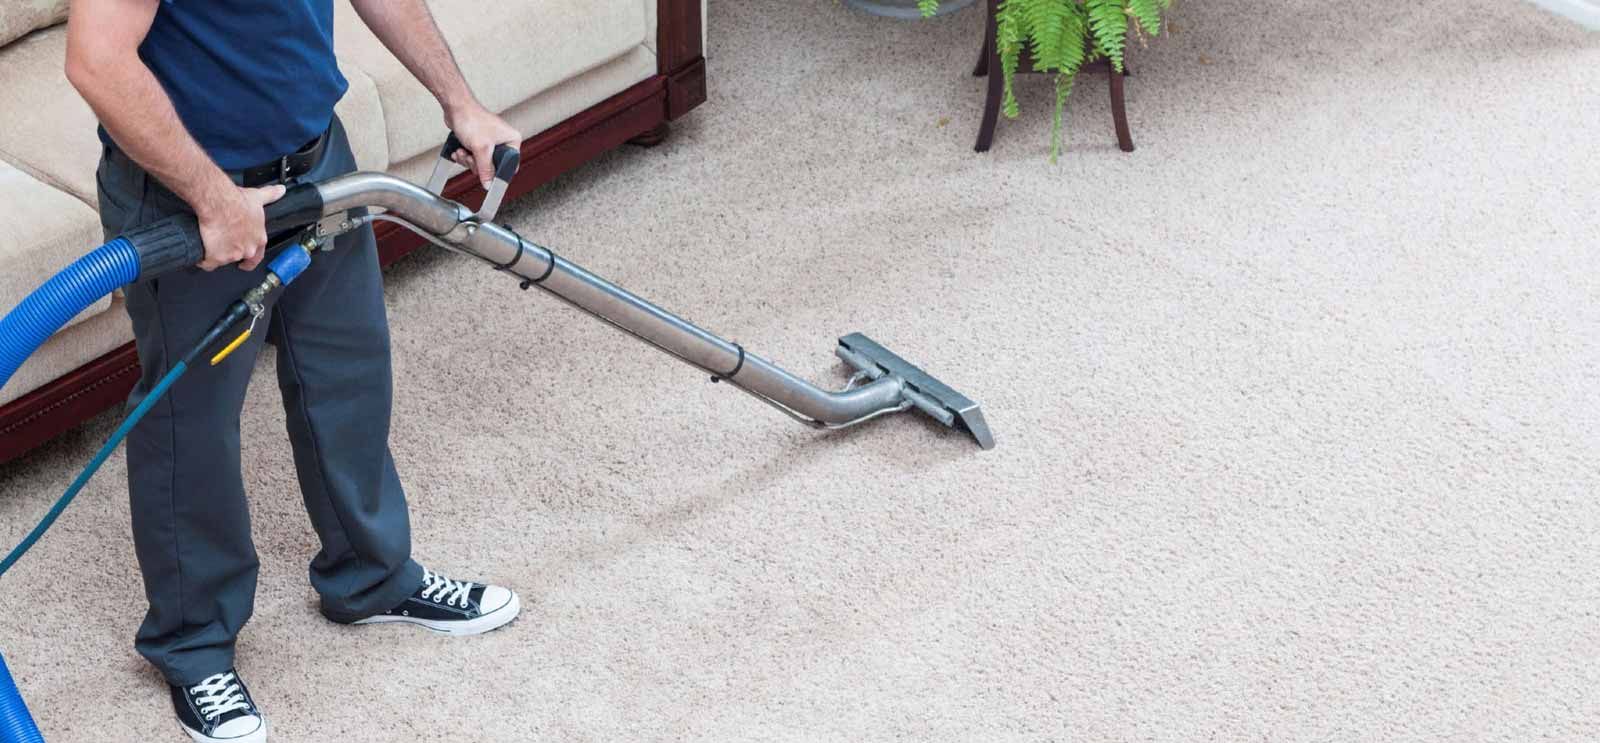 Professional Carpet Cleaning Services In Conroe And Woodlands Tx